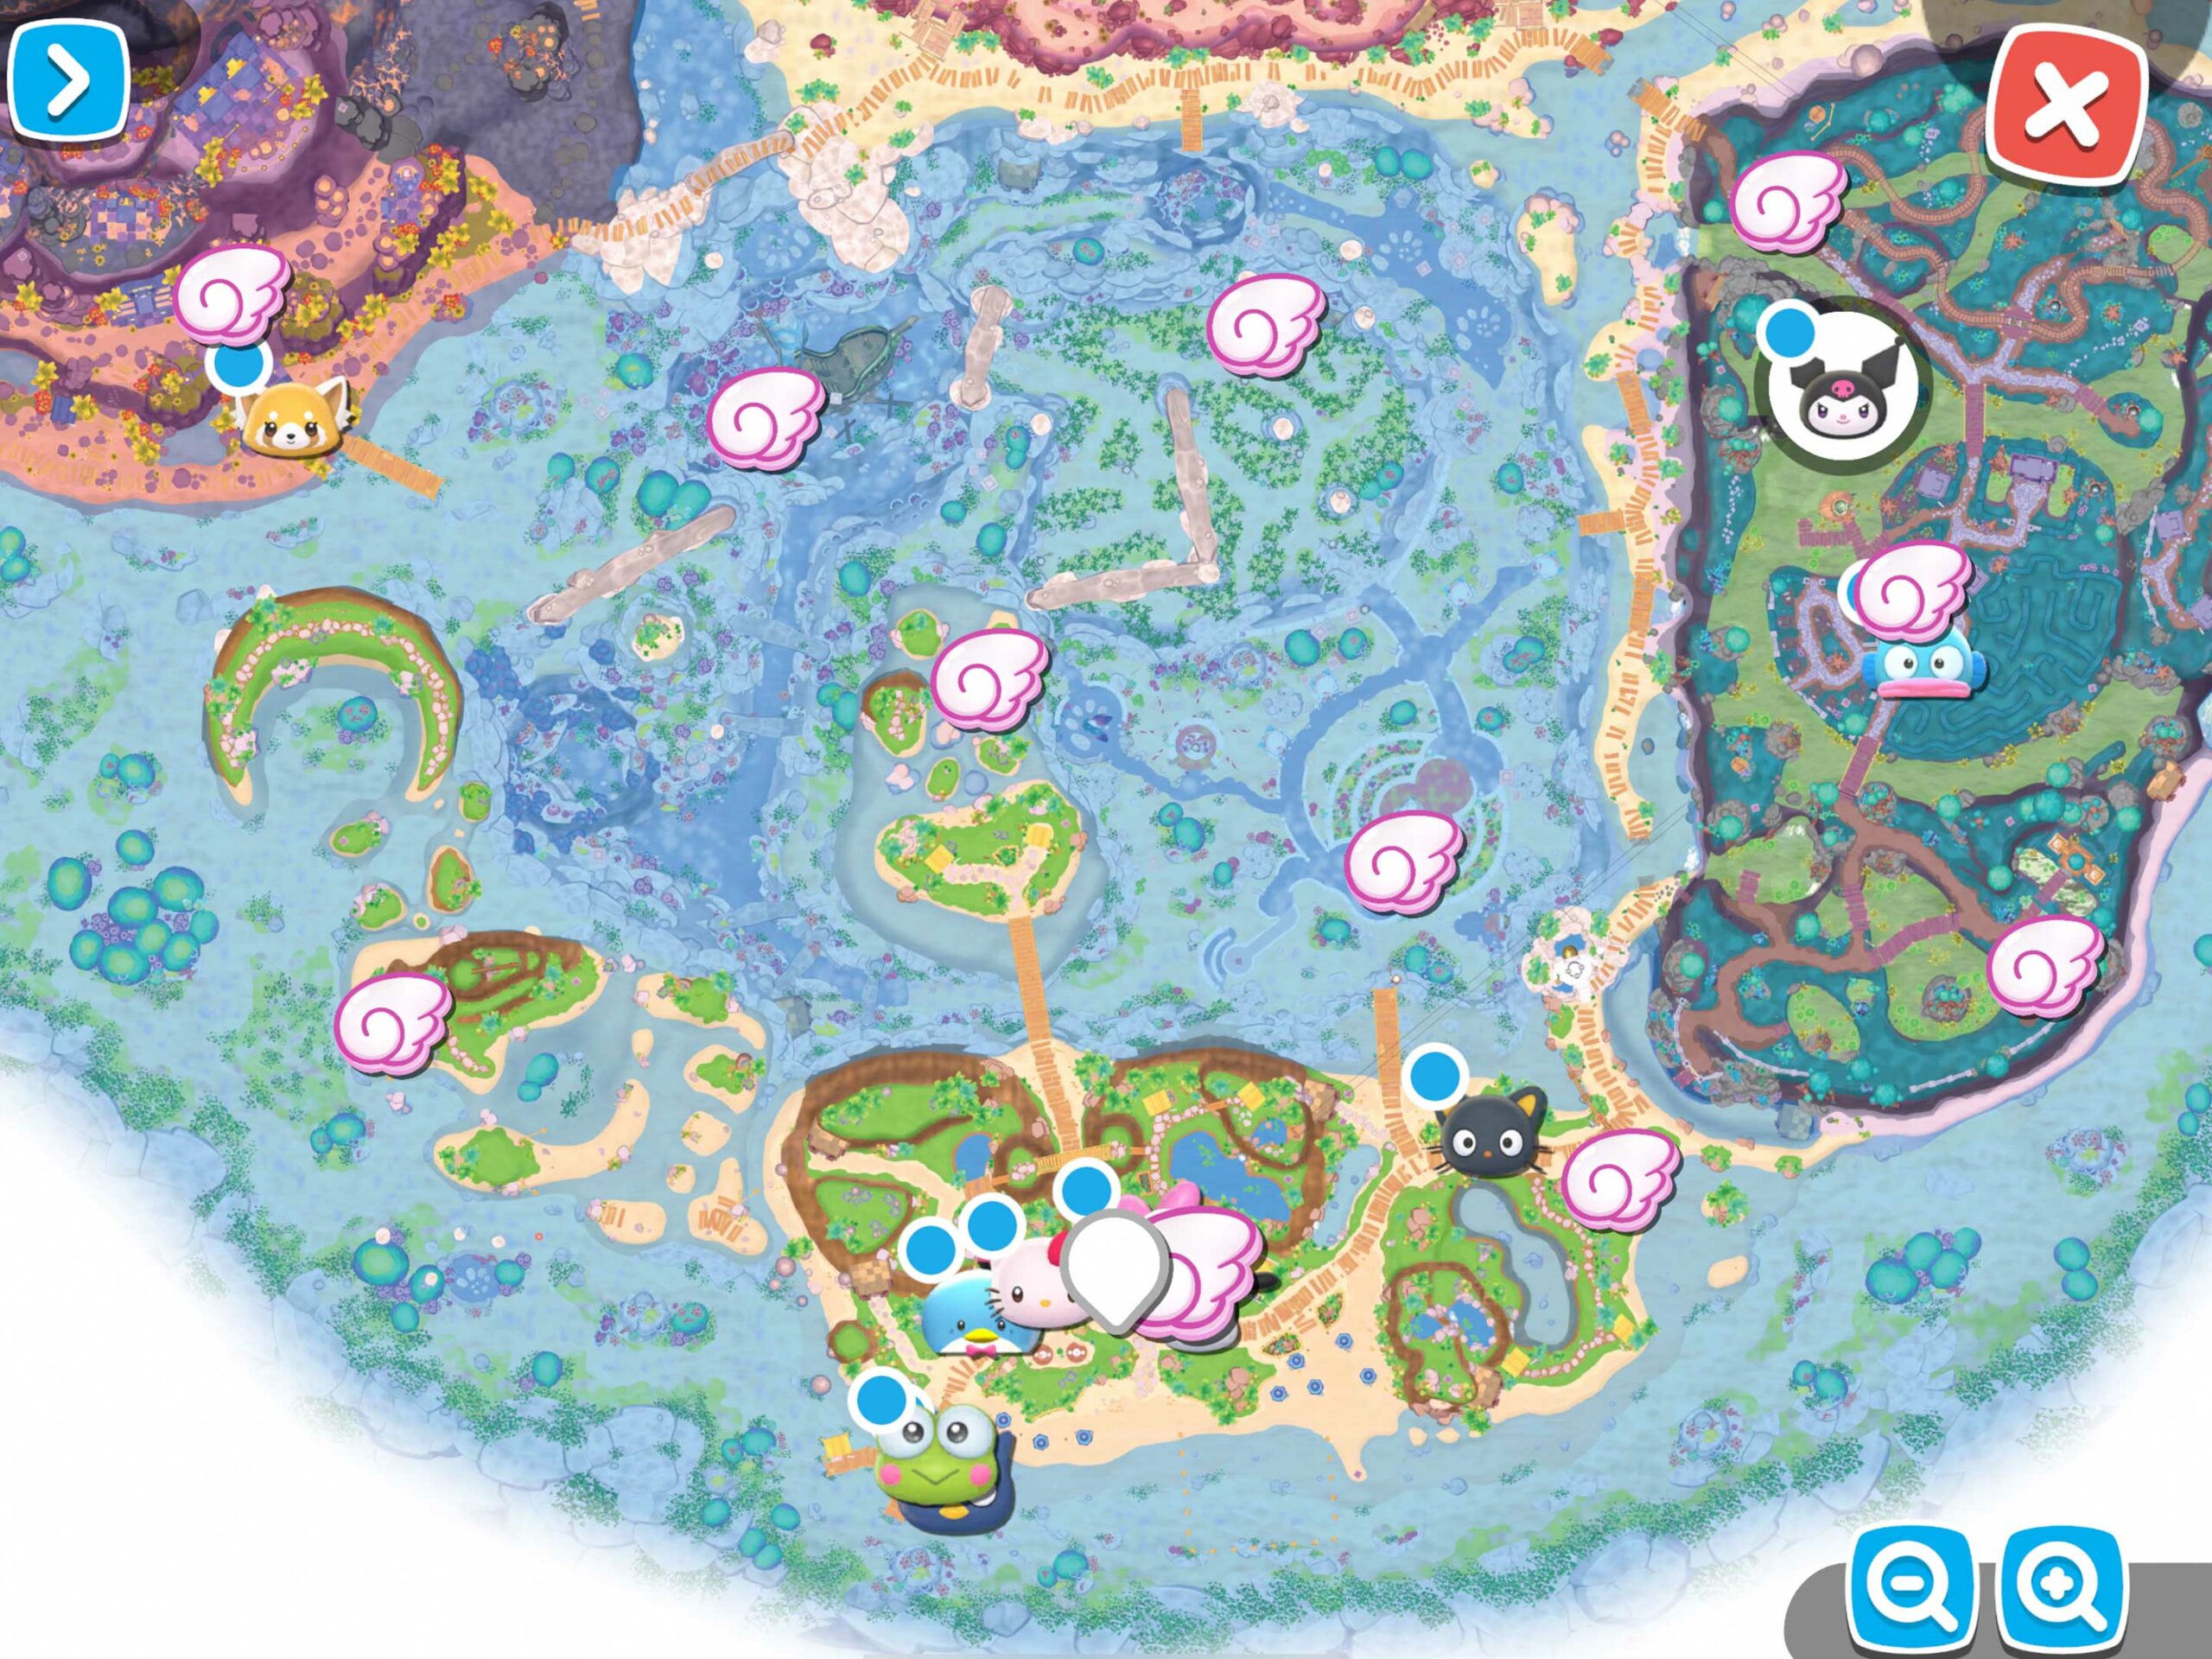 Hello Kitty Island Adventure is great for the first week, but new